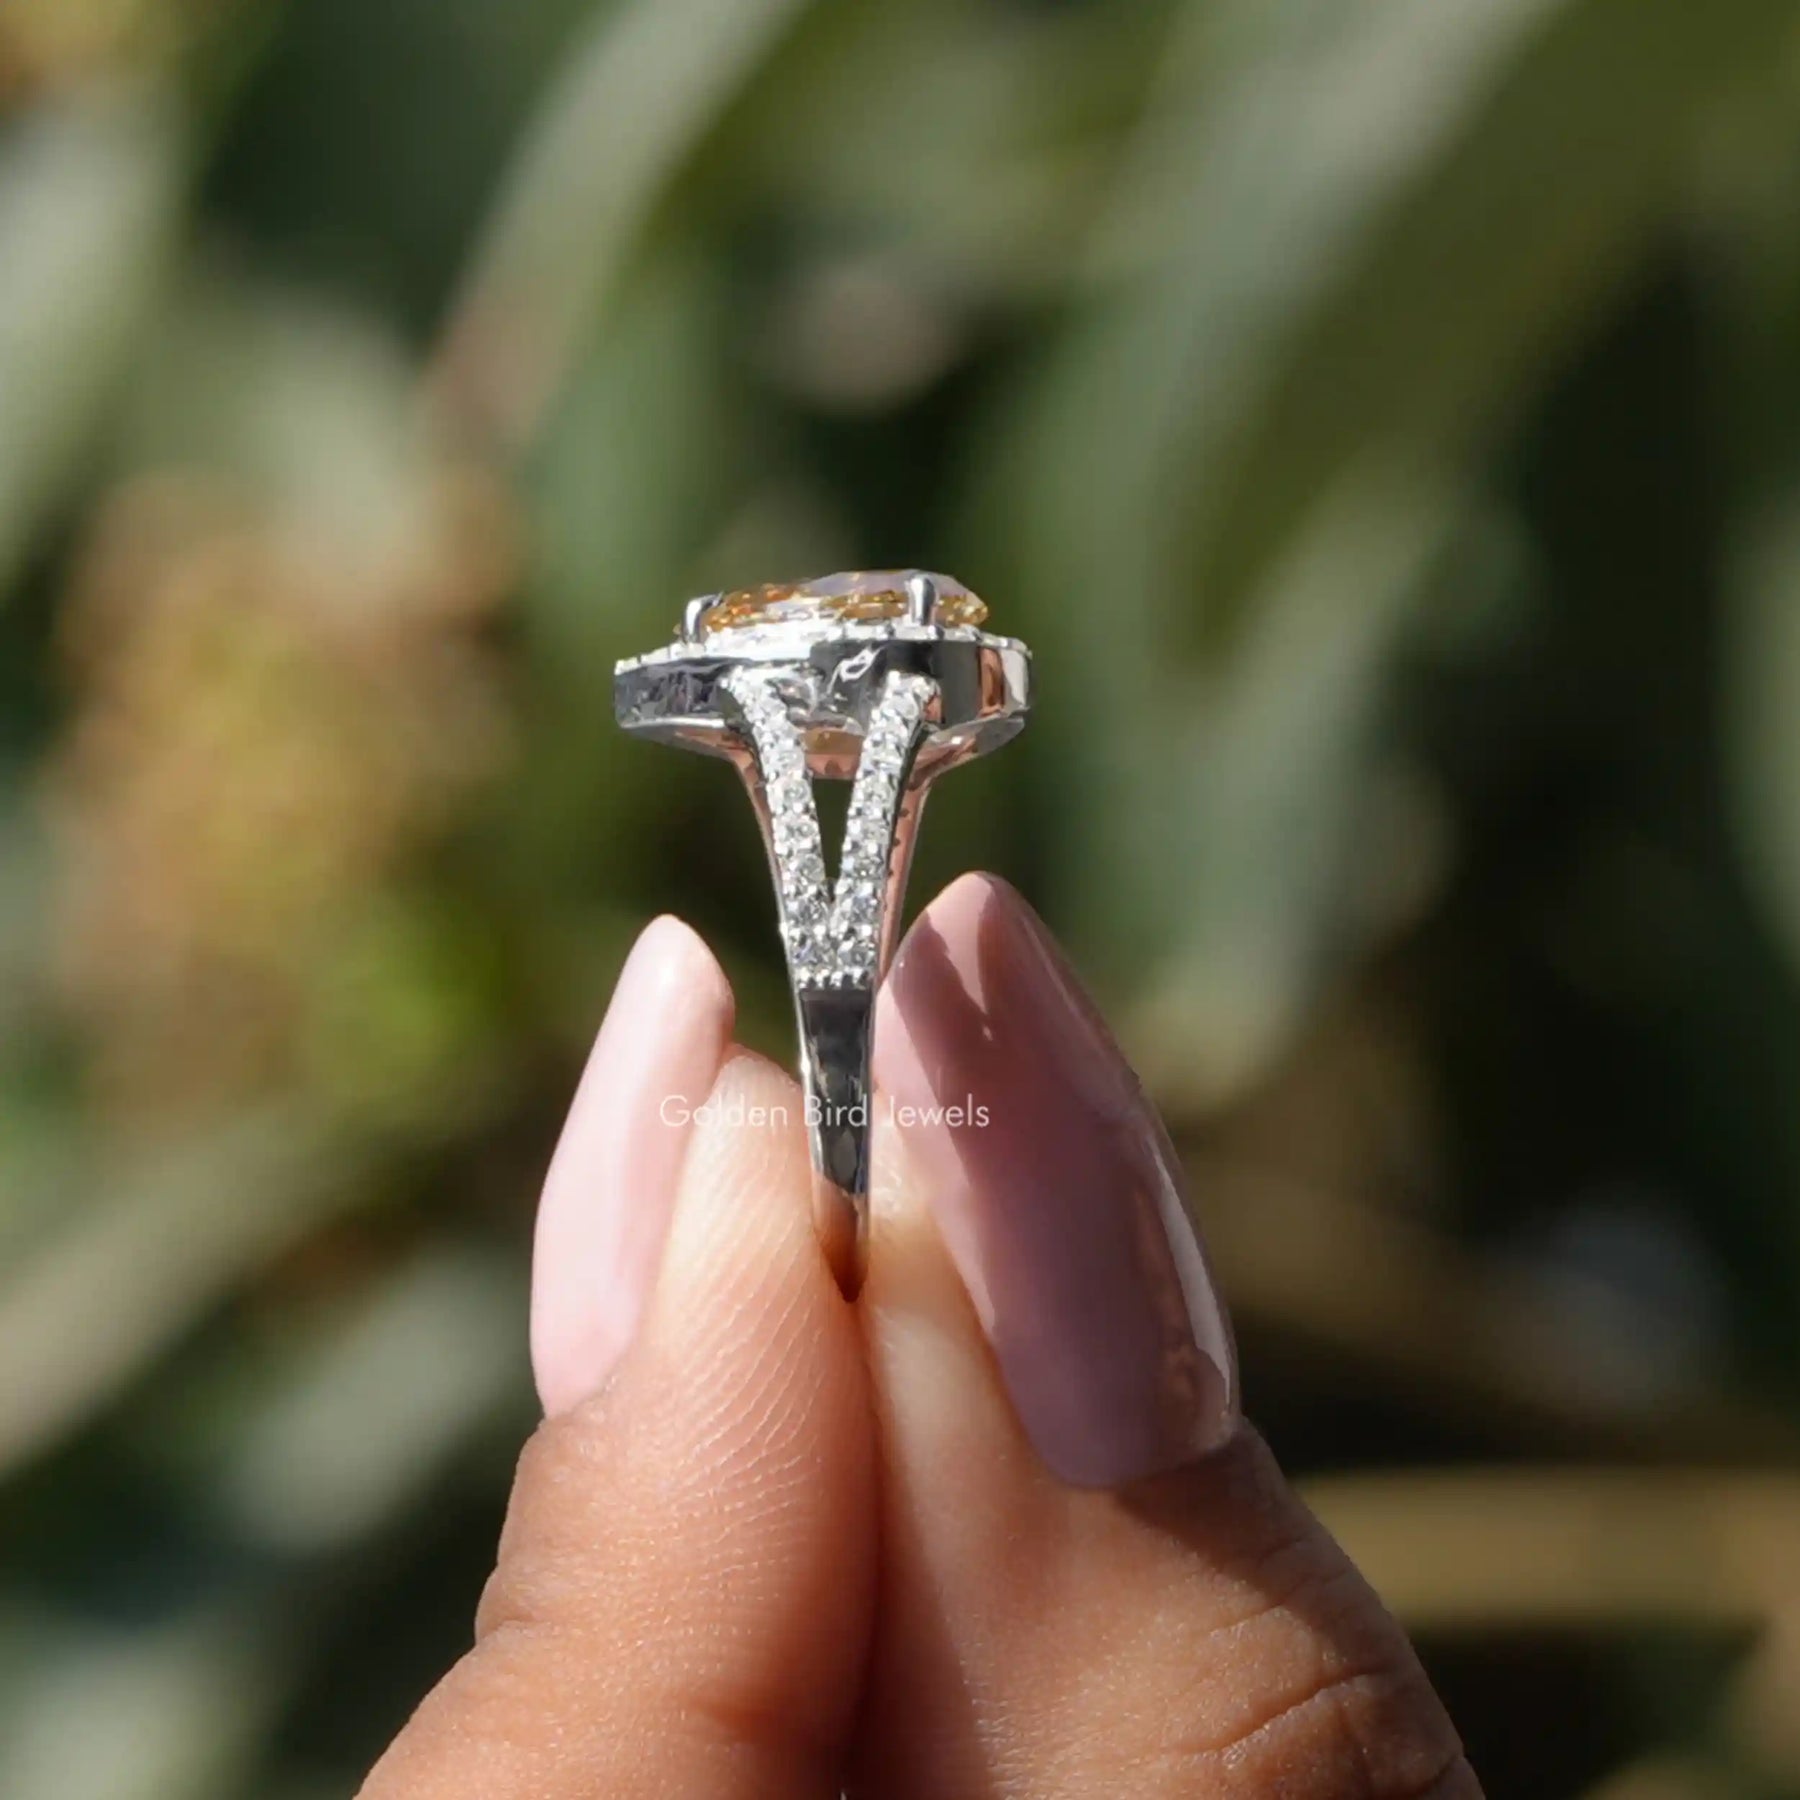 [Side view of pear shaped moissanite engagement ring made of round cut side stones]-[Golden Bird Jewels]